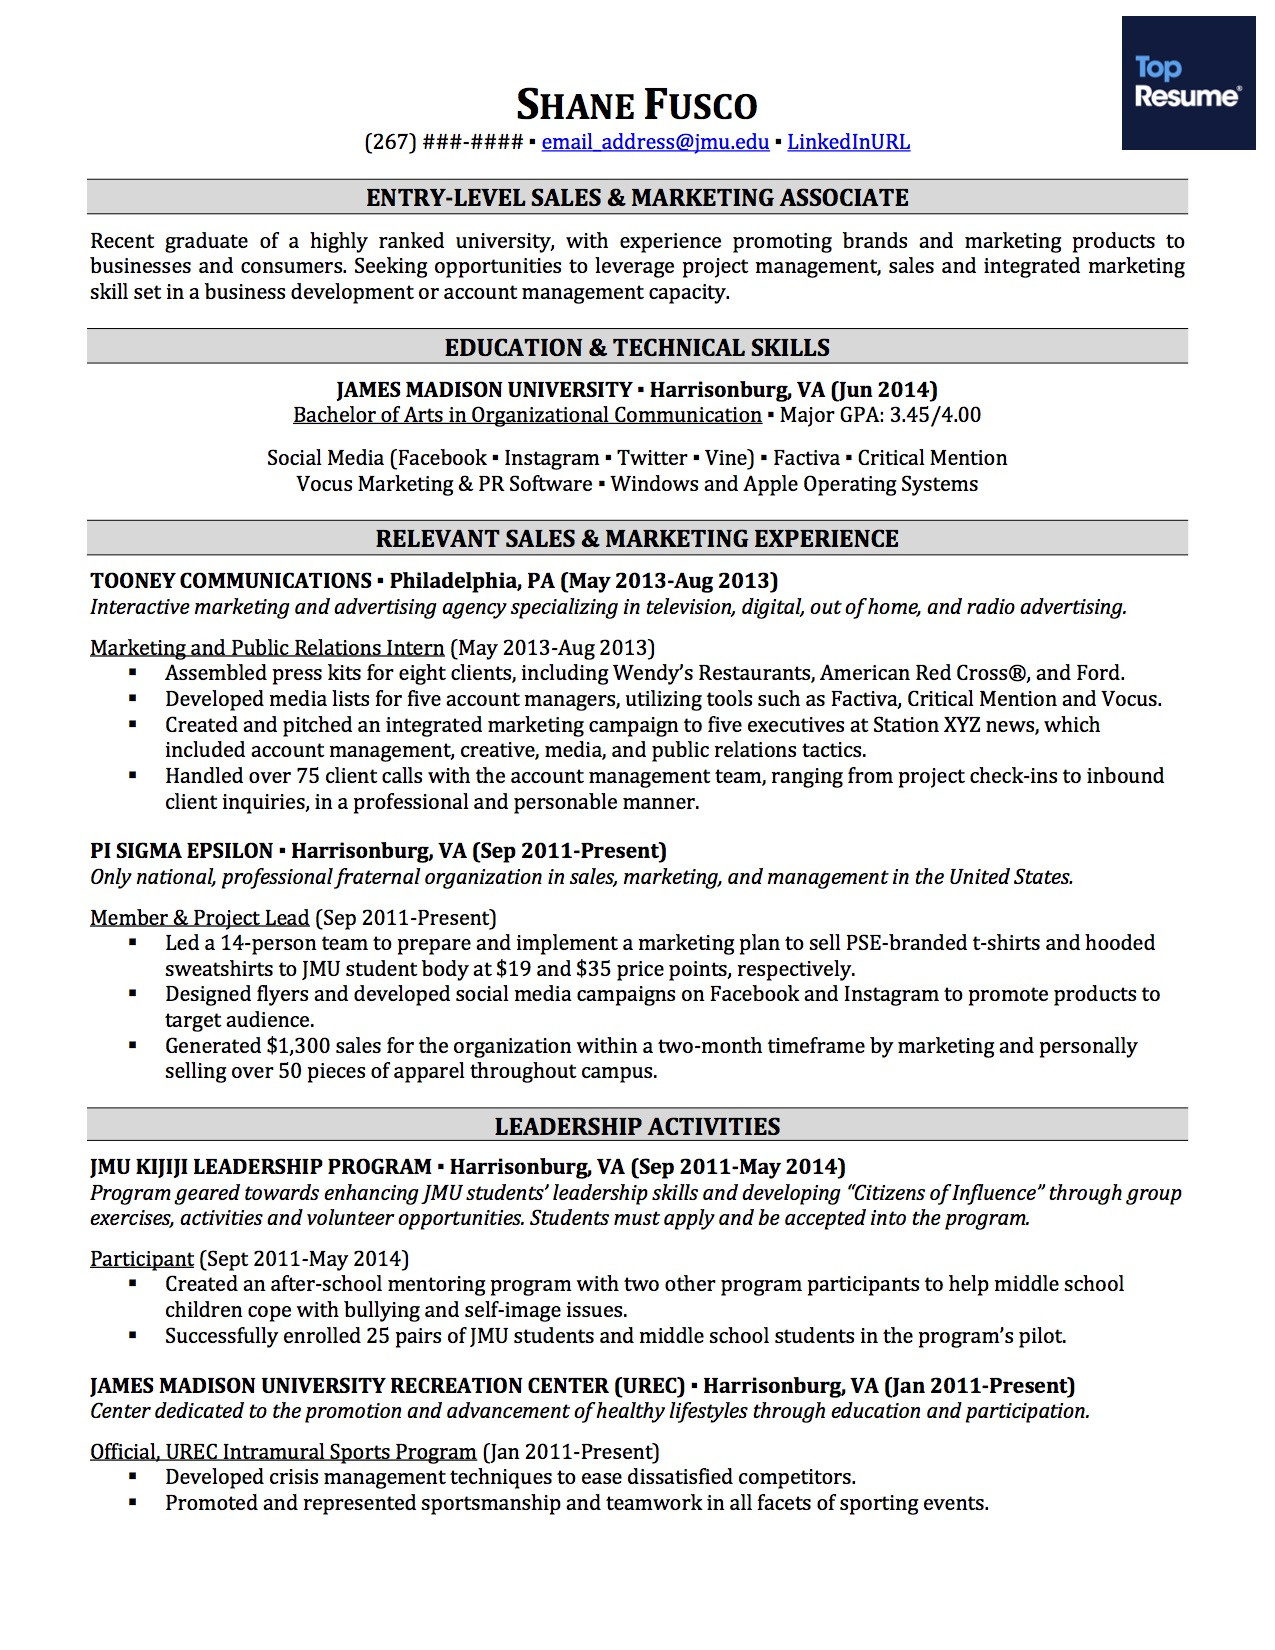 Resume Samples for College Students Entry Level How to Write A Resume with No Experience topresume